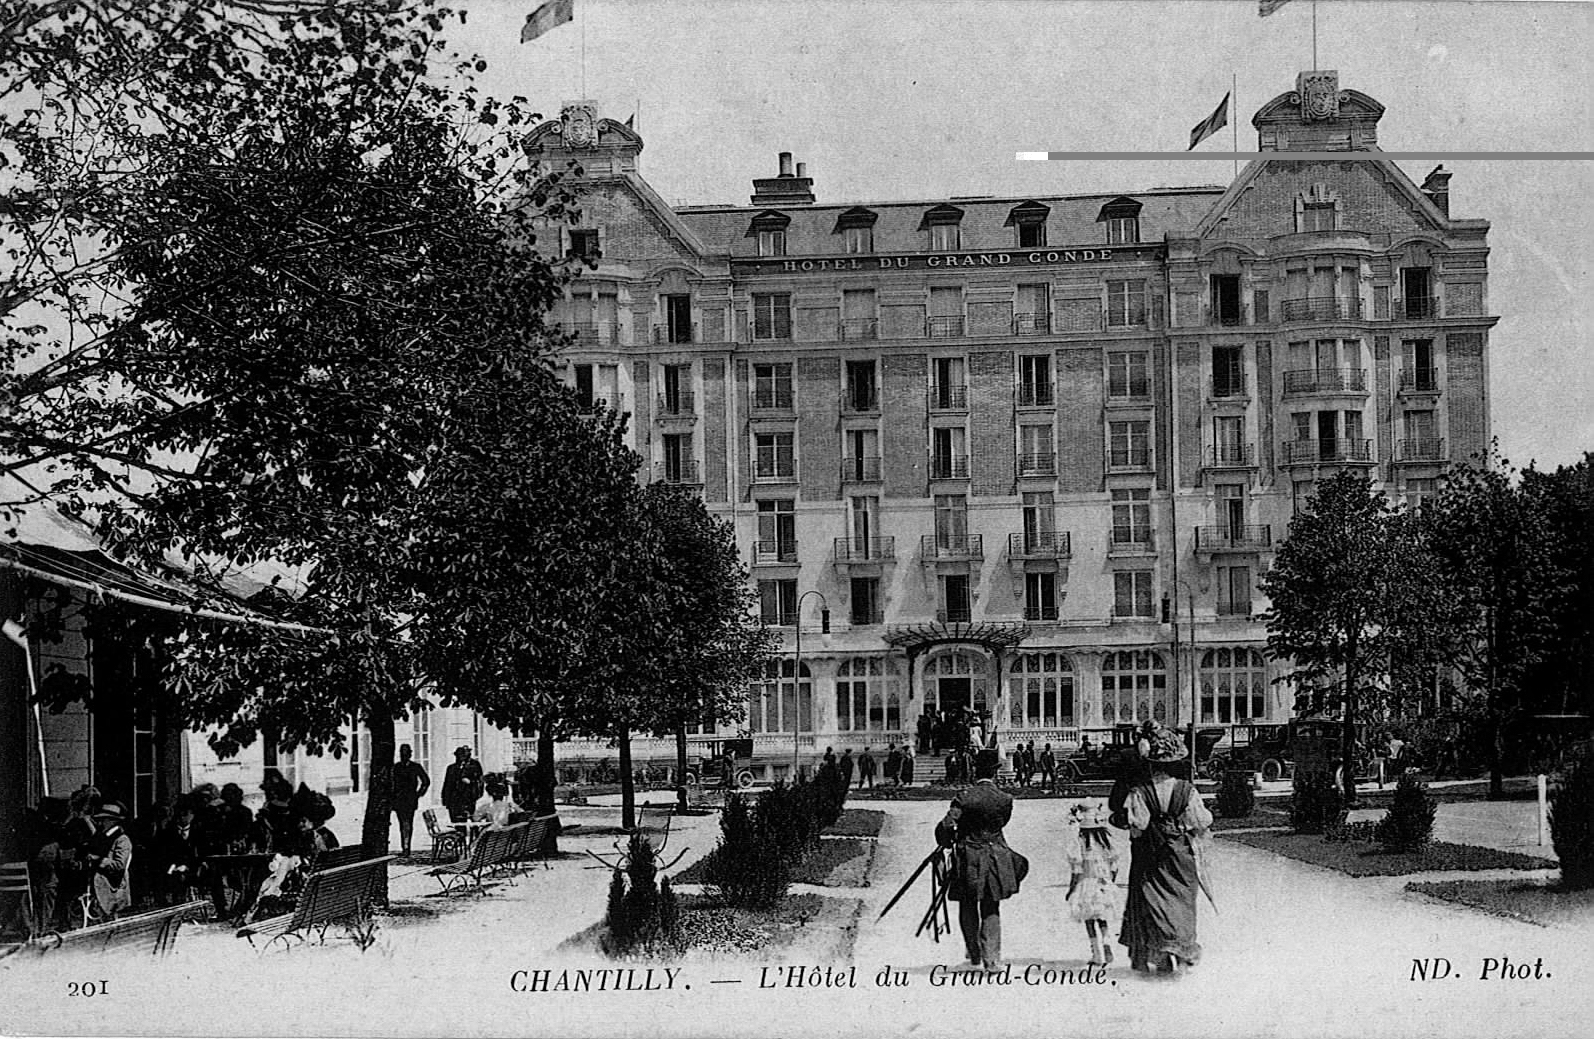 Where to find the rich and famous: the Hotel du Condé, which was built in 1908. Photo supplied by Sarah Gillois (responsable for heritage and culture at Chantilly town council